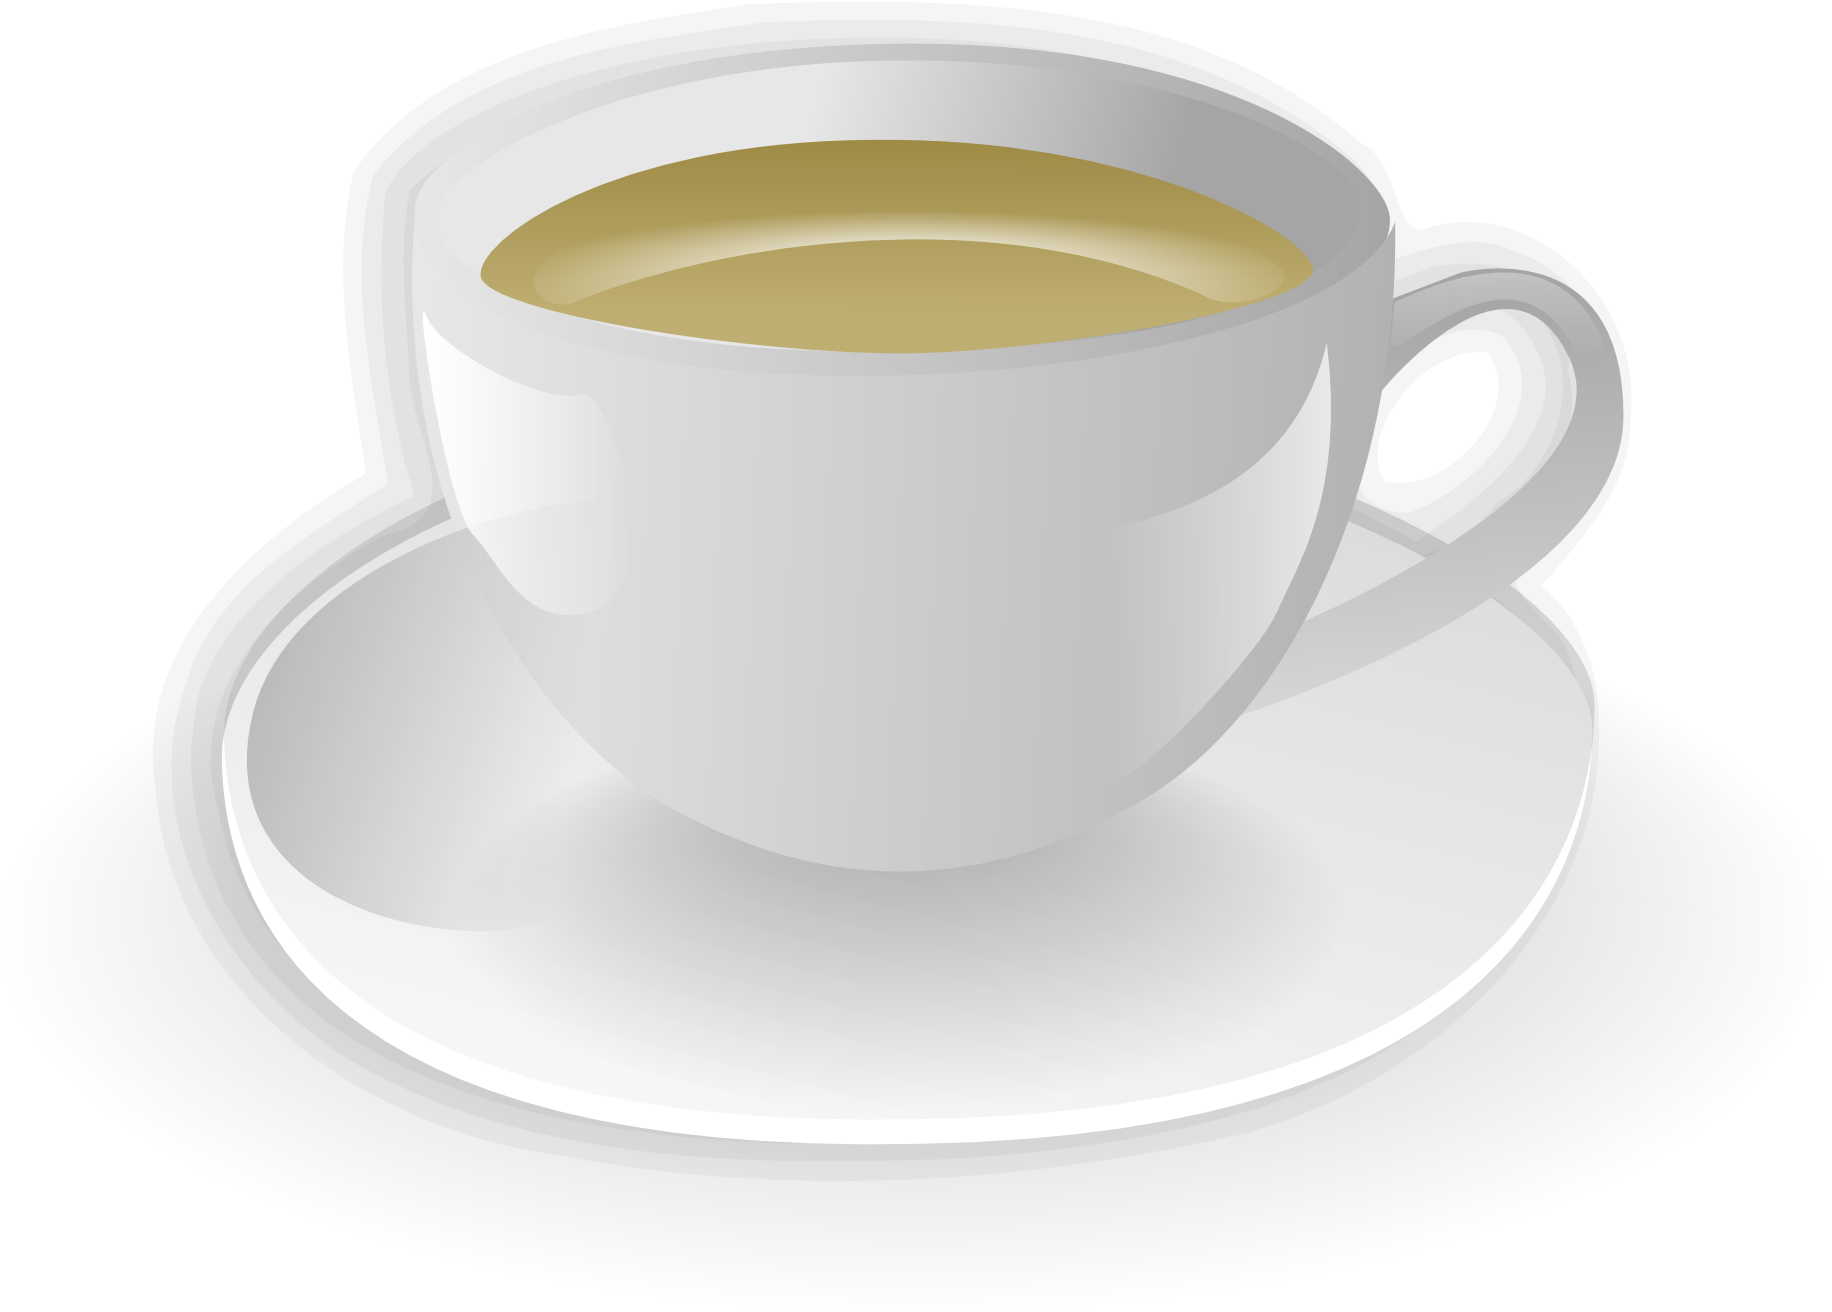 Tea Cup Clipart 27, - Cup Of Coffee Clipart (1969x1969)